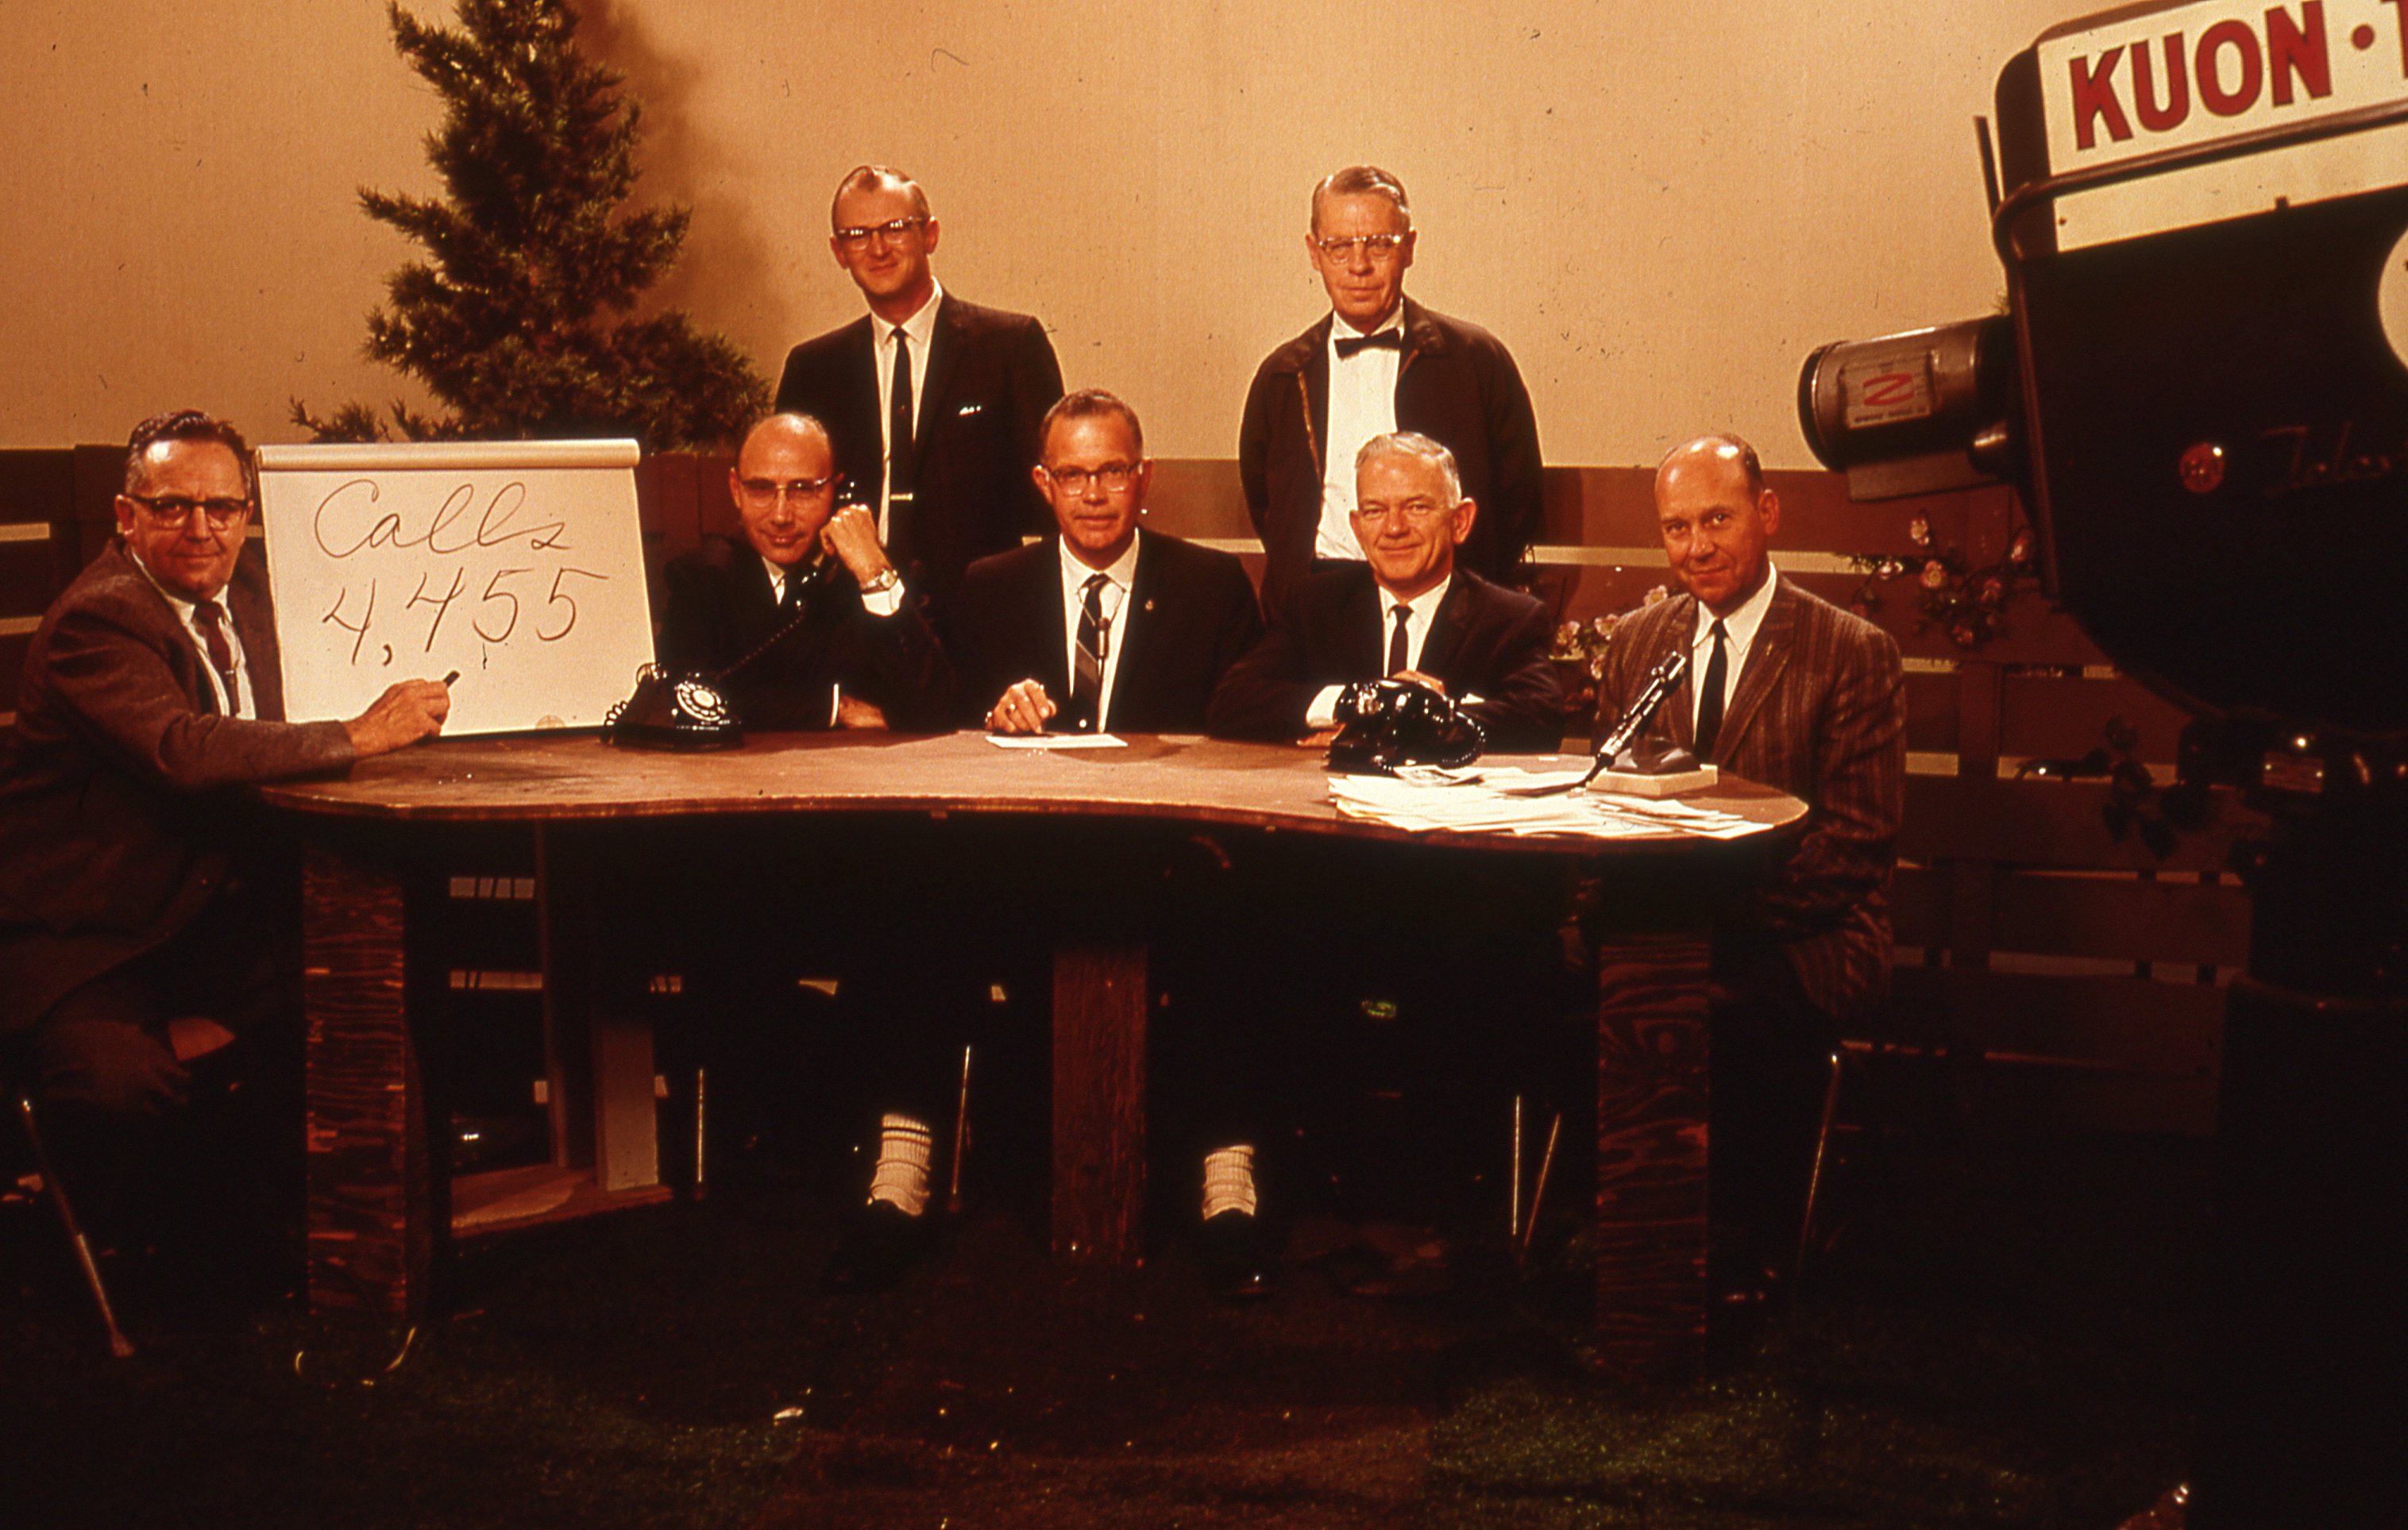 “Backyard Farmer,” the longest-running locally produced TV program in the country, celebrates its 70th anniversary this spring. Pictured here during the show’s 1967 season are (from left) Wayne Whitney, extension horticulture specialist; John Wheihing, extension plant pathologist; Dwayne Trenkle (standing), co-host; John Furrer, extension turf and weed specialist; George Round (standing), founder and host; Bob Roselle, extension entomologist; and Cyril Bish, extension educator.